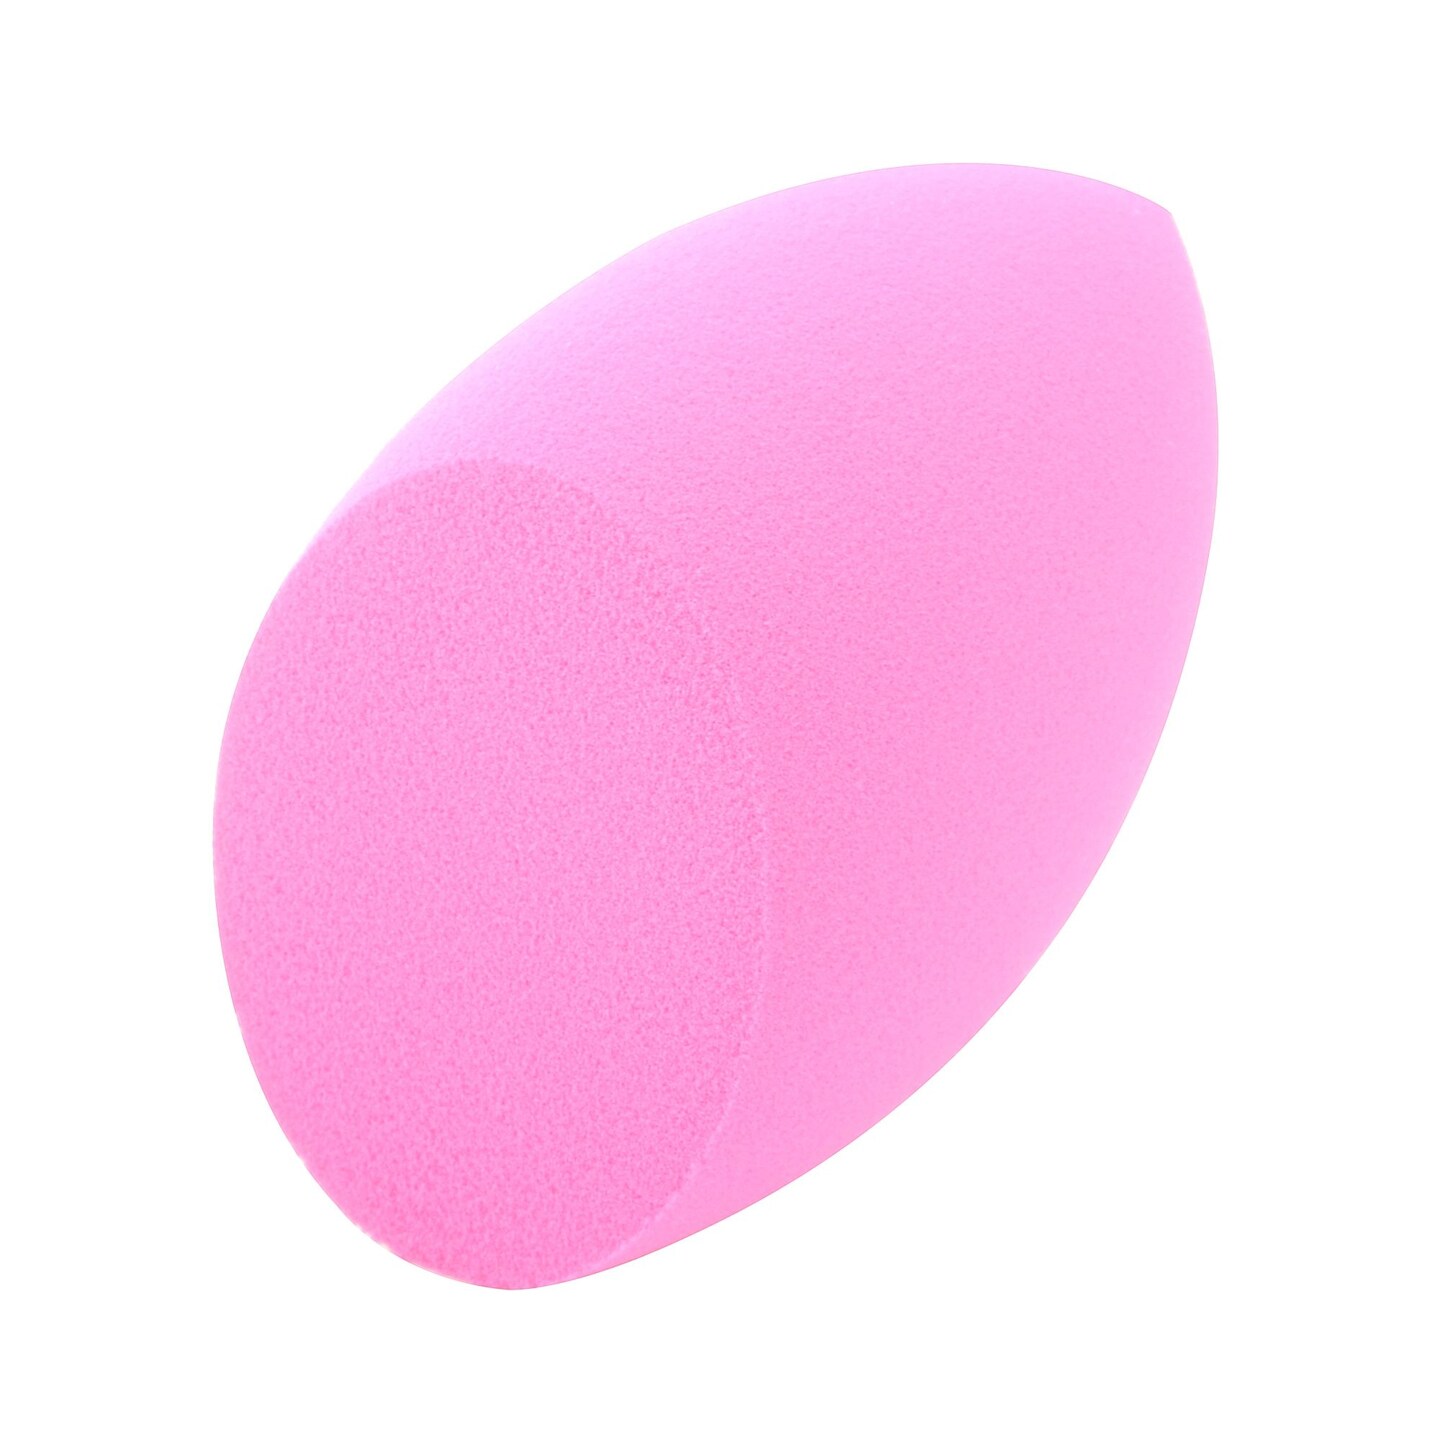 Makeup Sponge Blender by Zodaca  Powder Smooth Puff Flawless Beauty Foundation - Special Egg Shape -  Light Pink